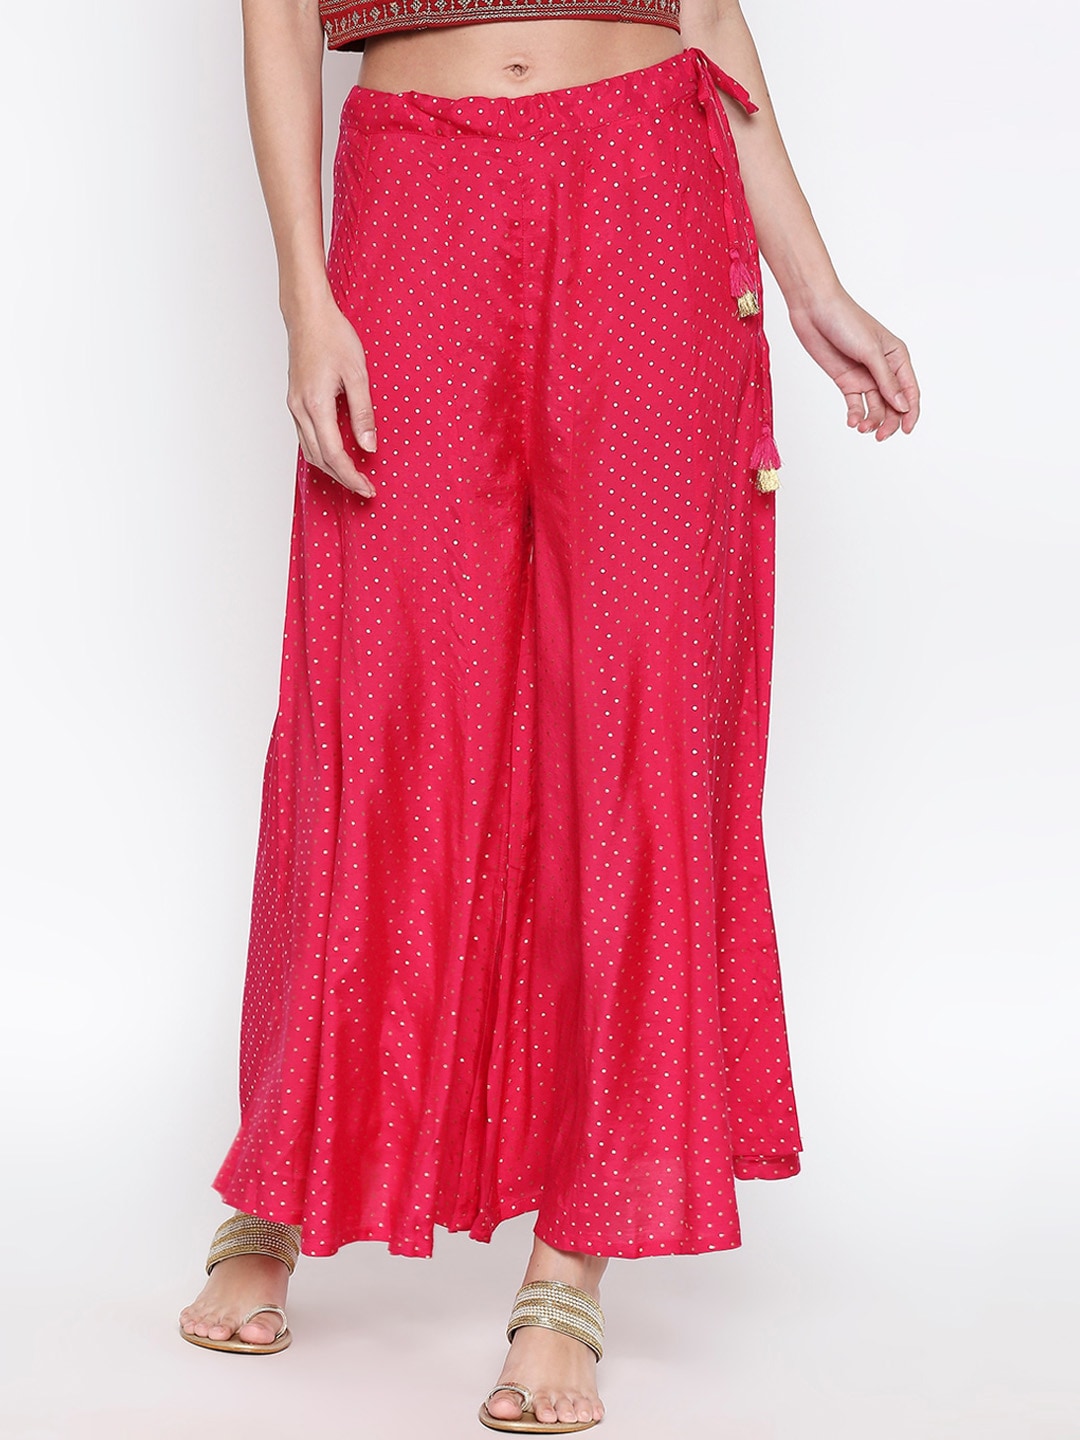 RANGMANCH BY PANTALOONS Women Fuchsia Pink & Gold-Toned Printed Flared Palazzos Price in India